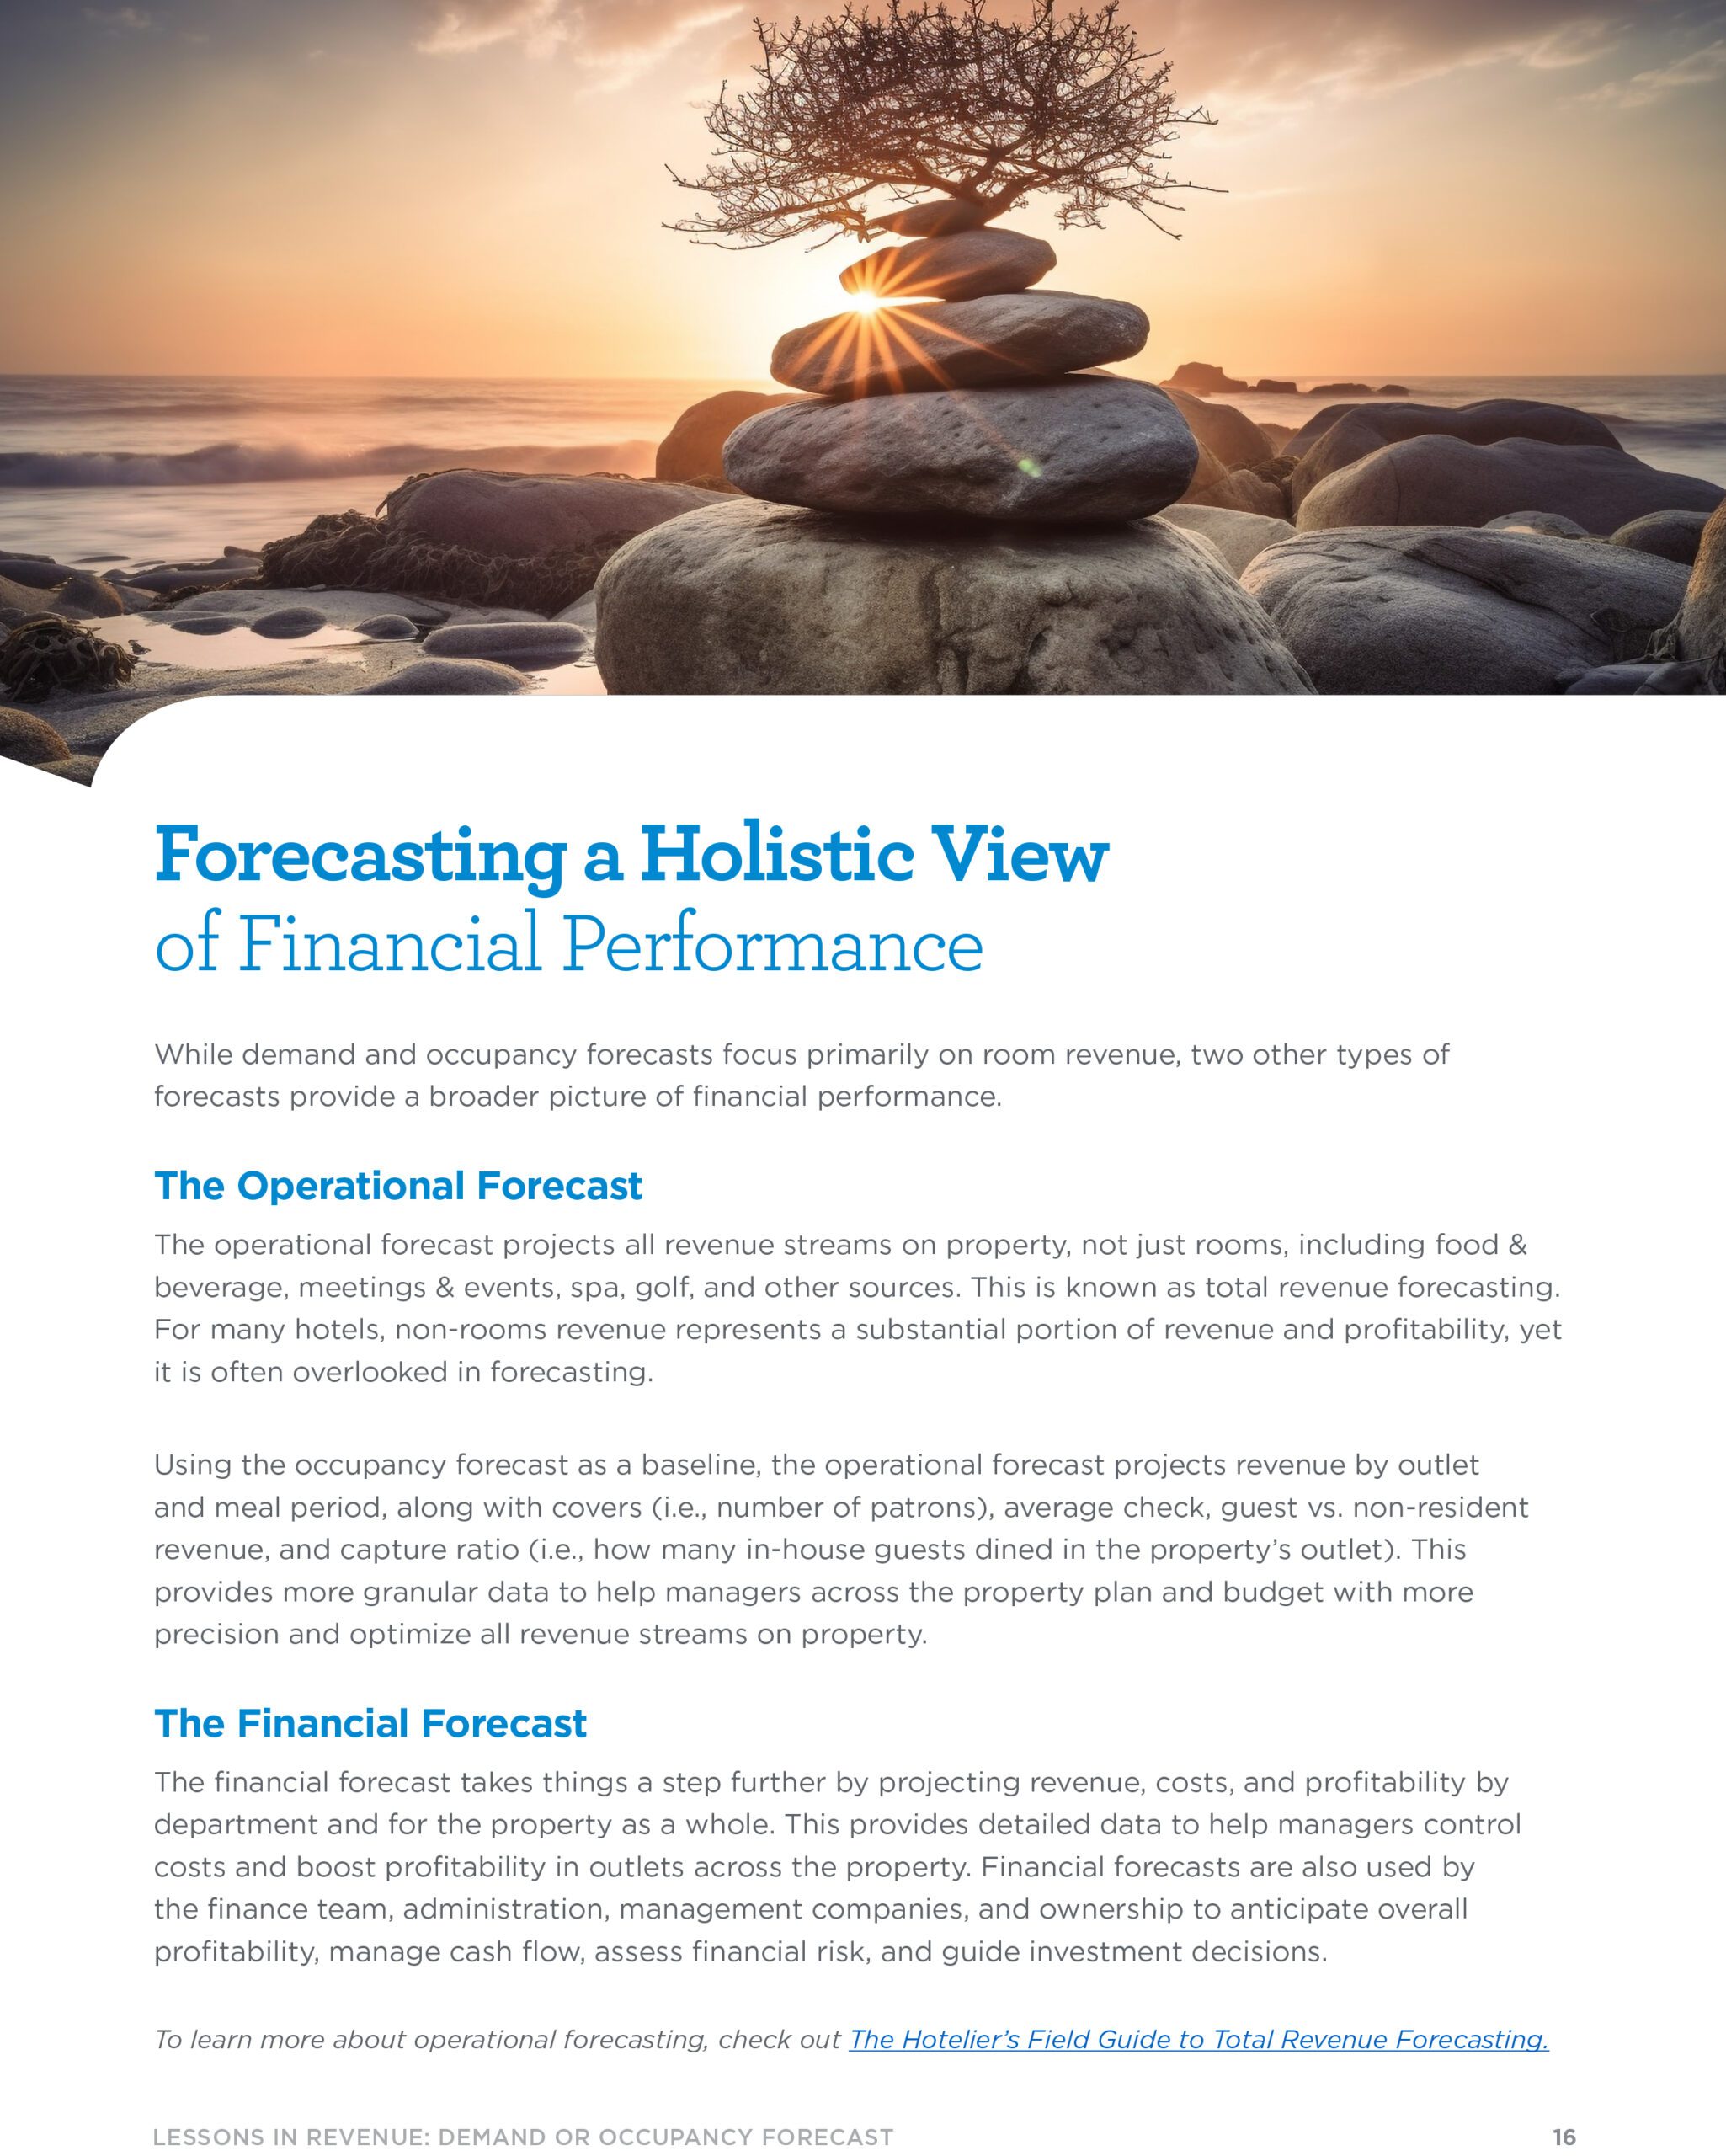 Page 15 - Forecasting a Holistic View of Financial Performance